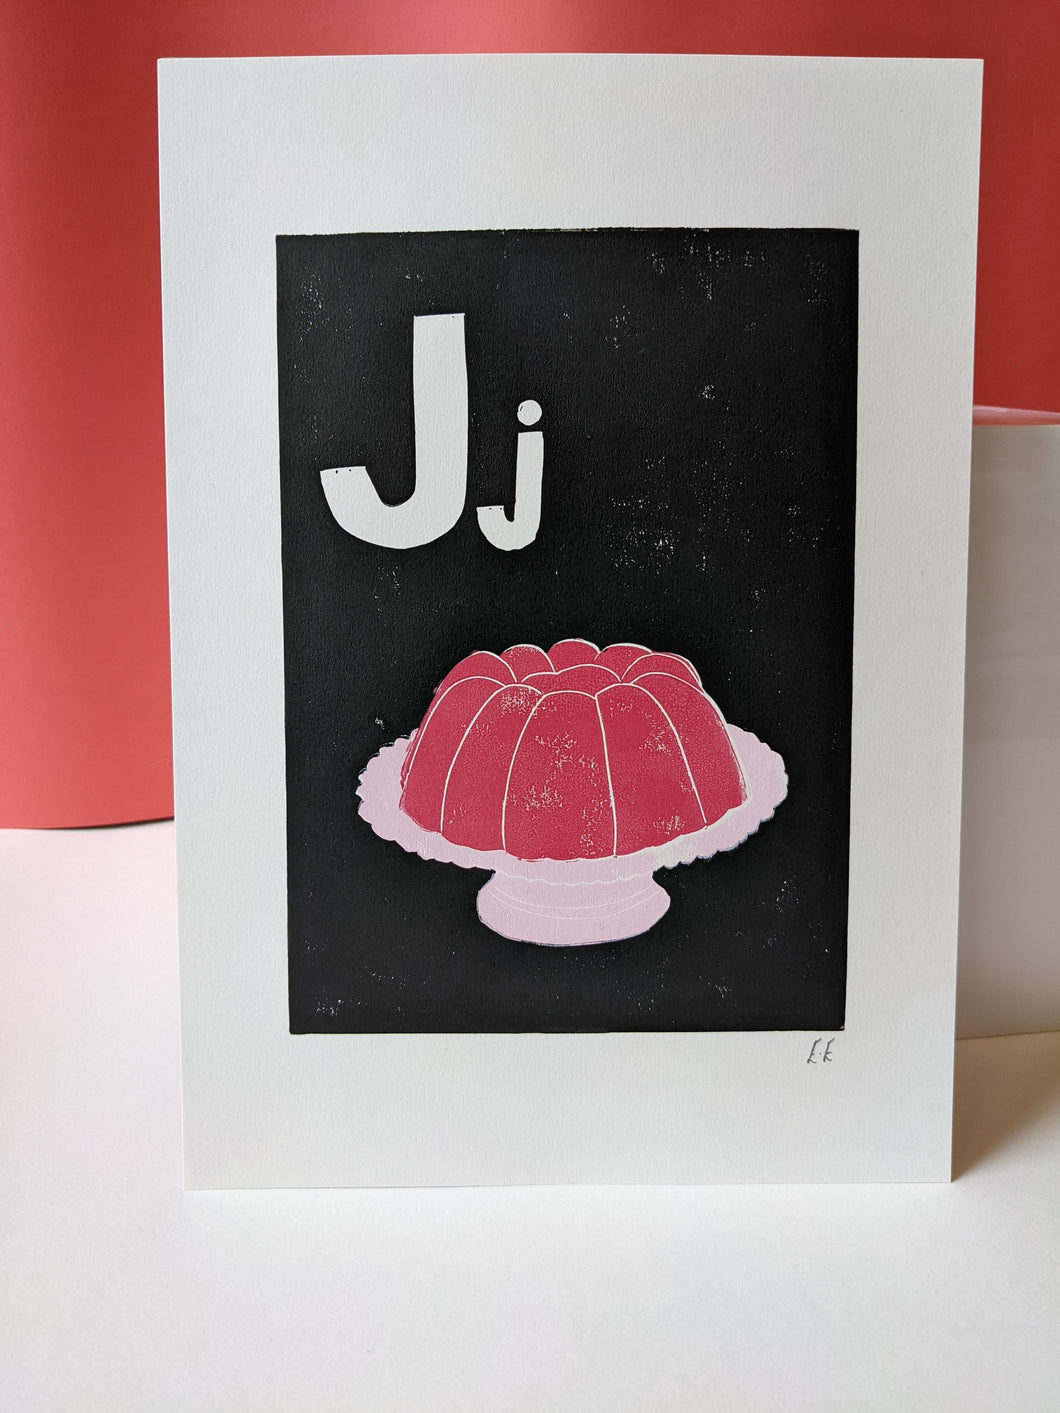 A black print with a pink jelly printed on it and the letter J